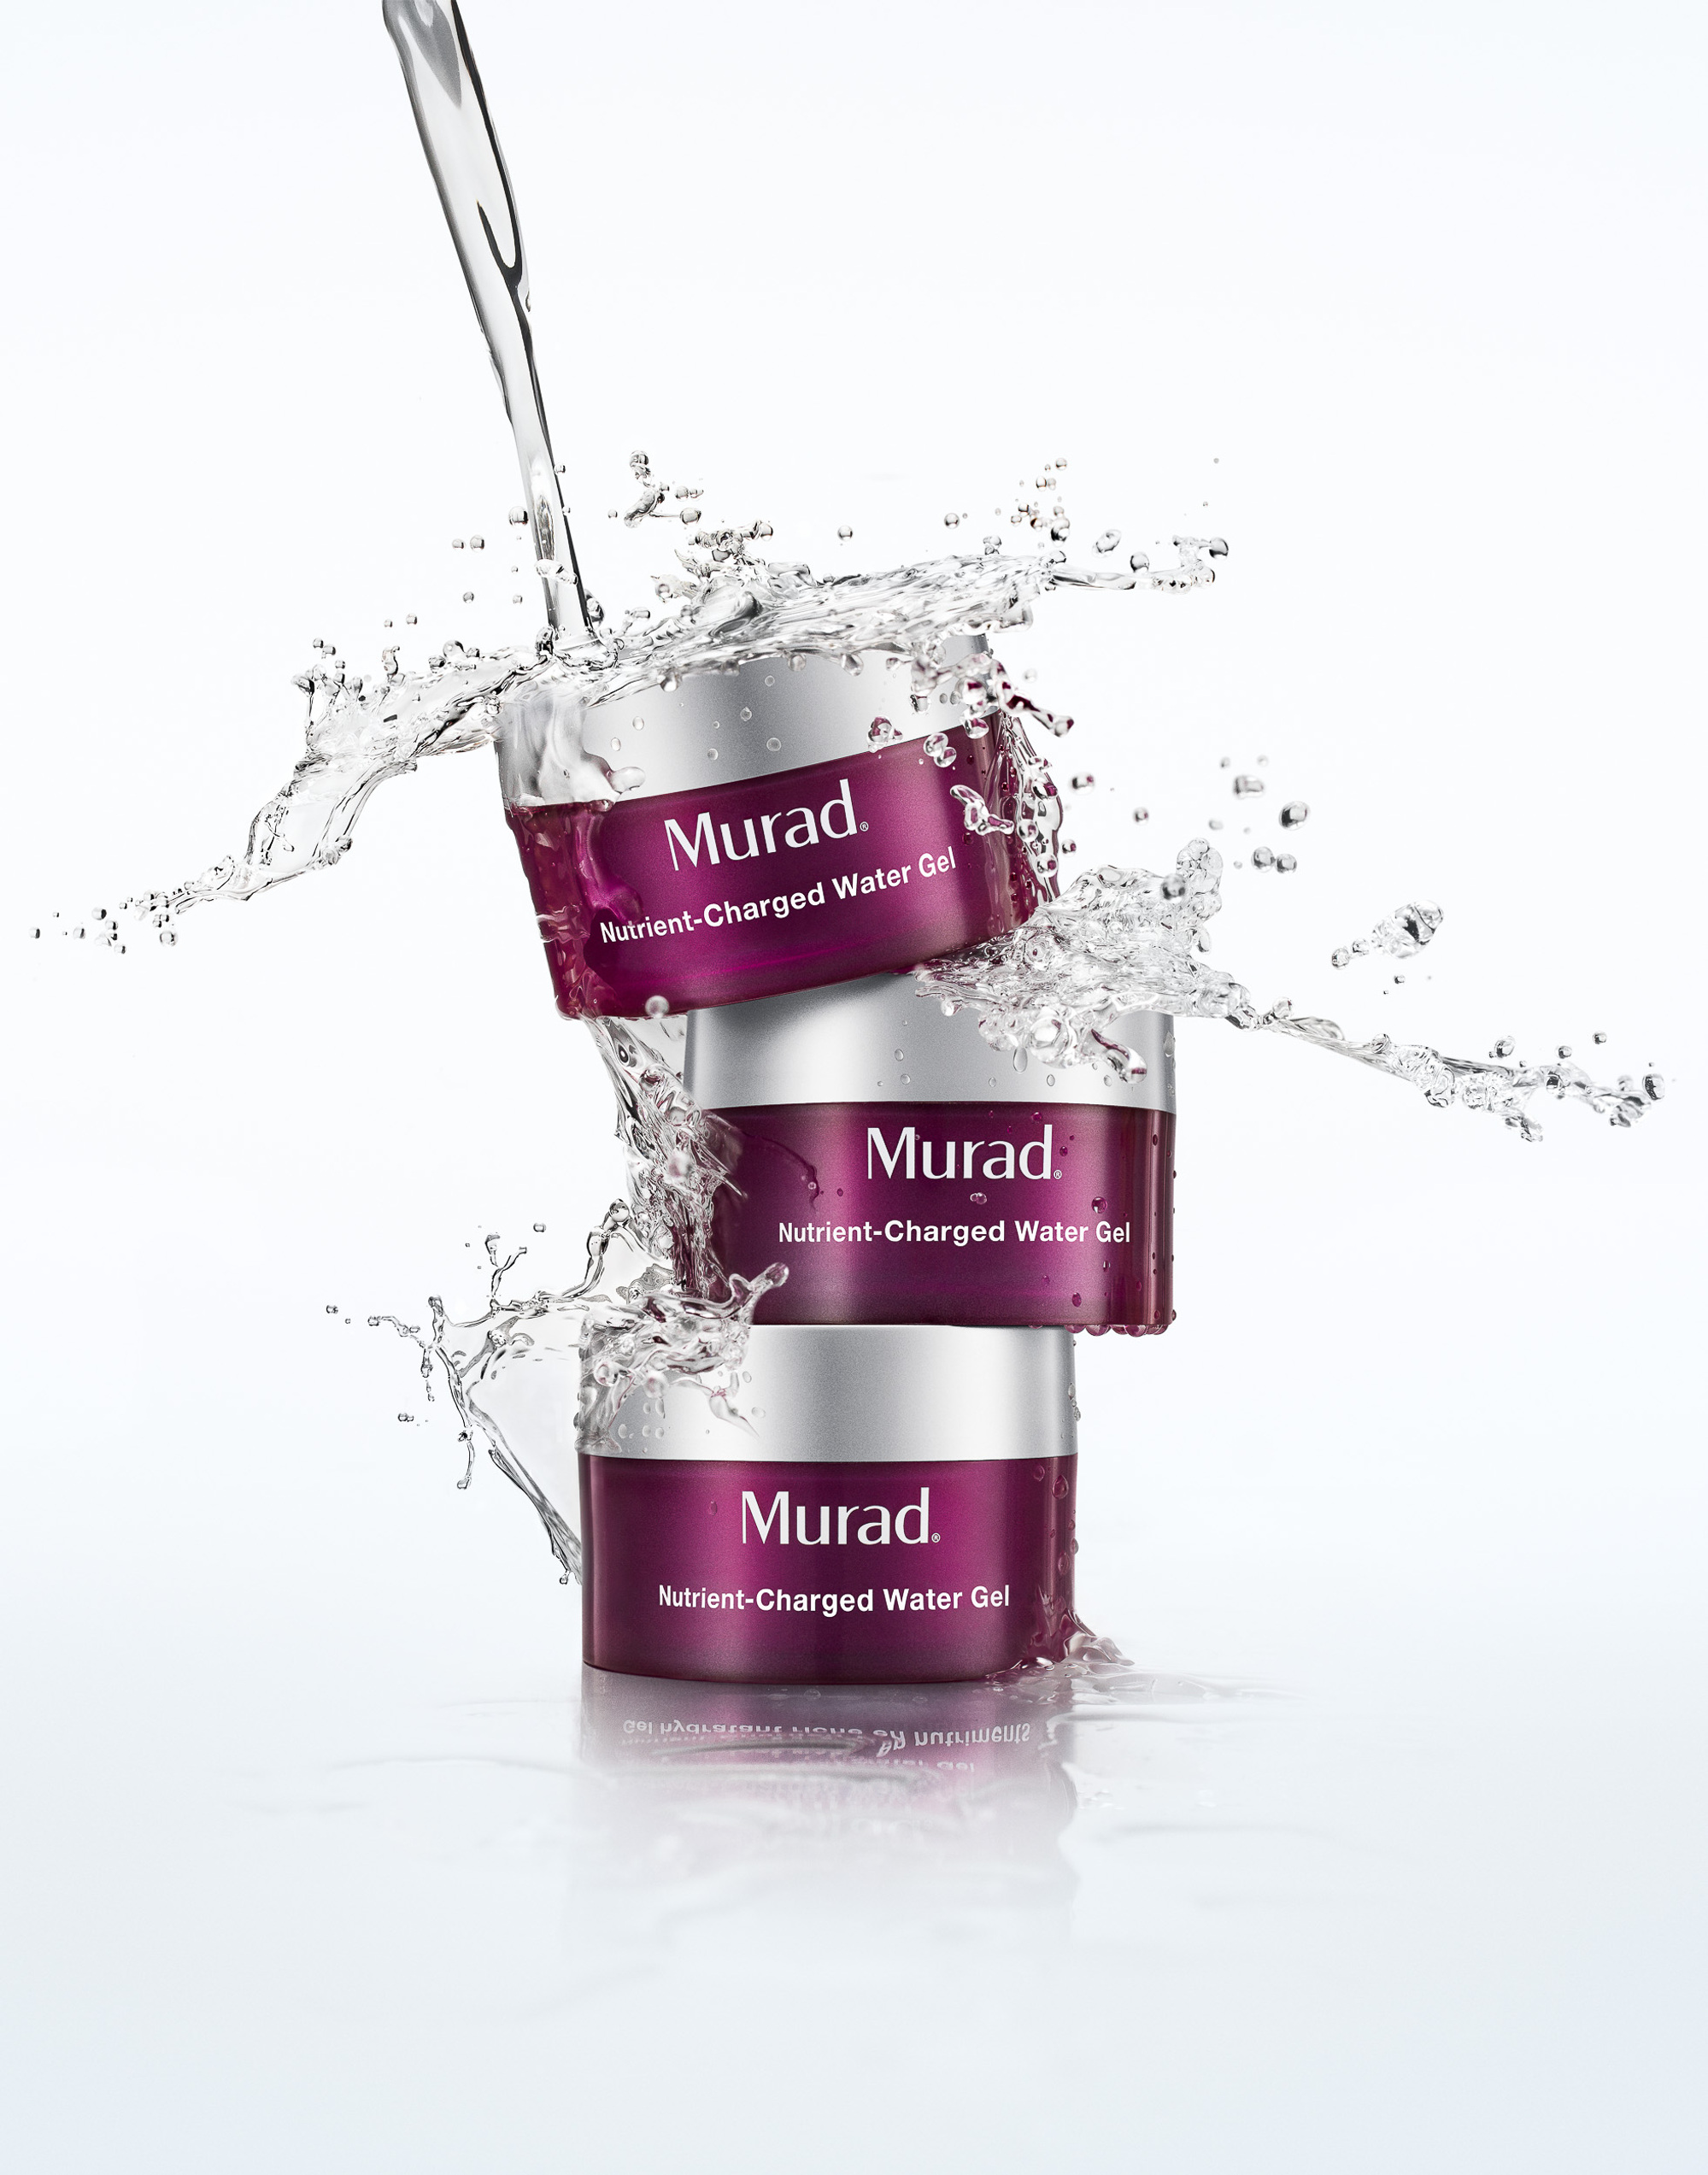 Murad cosmetics and beauty photography by commercial, product & advertising photographer Timothy Hogan in the Los Angeles Studio